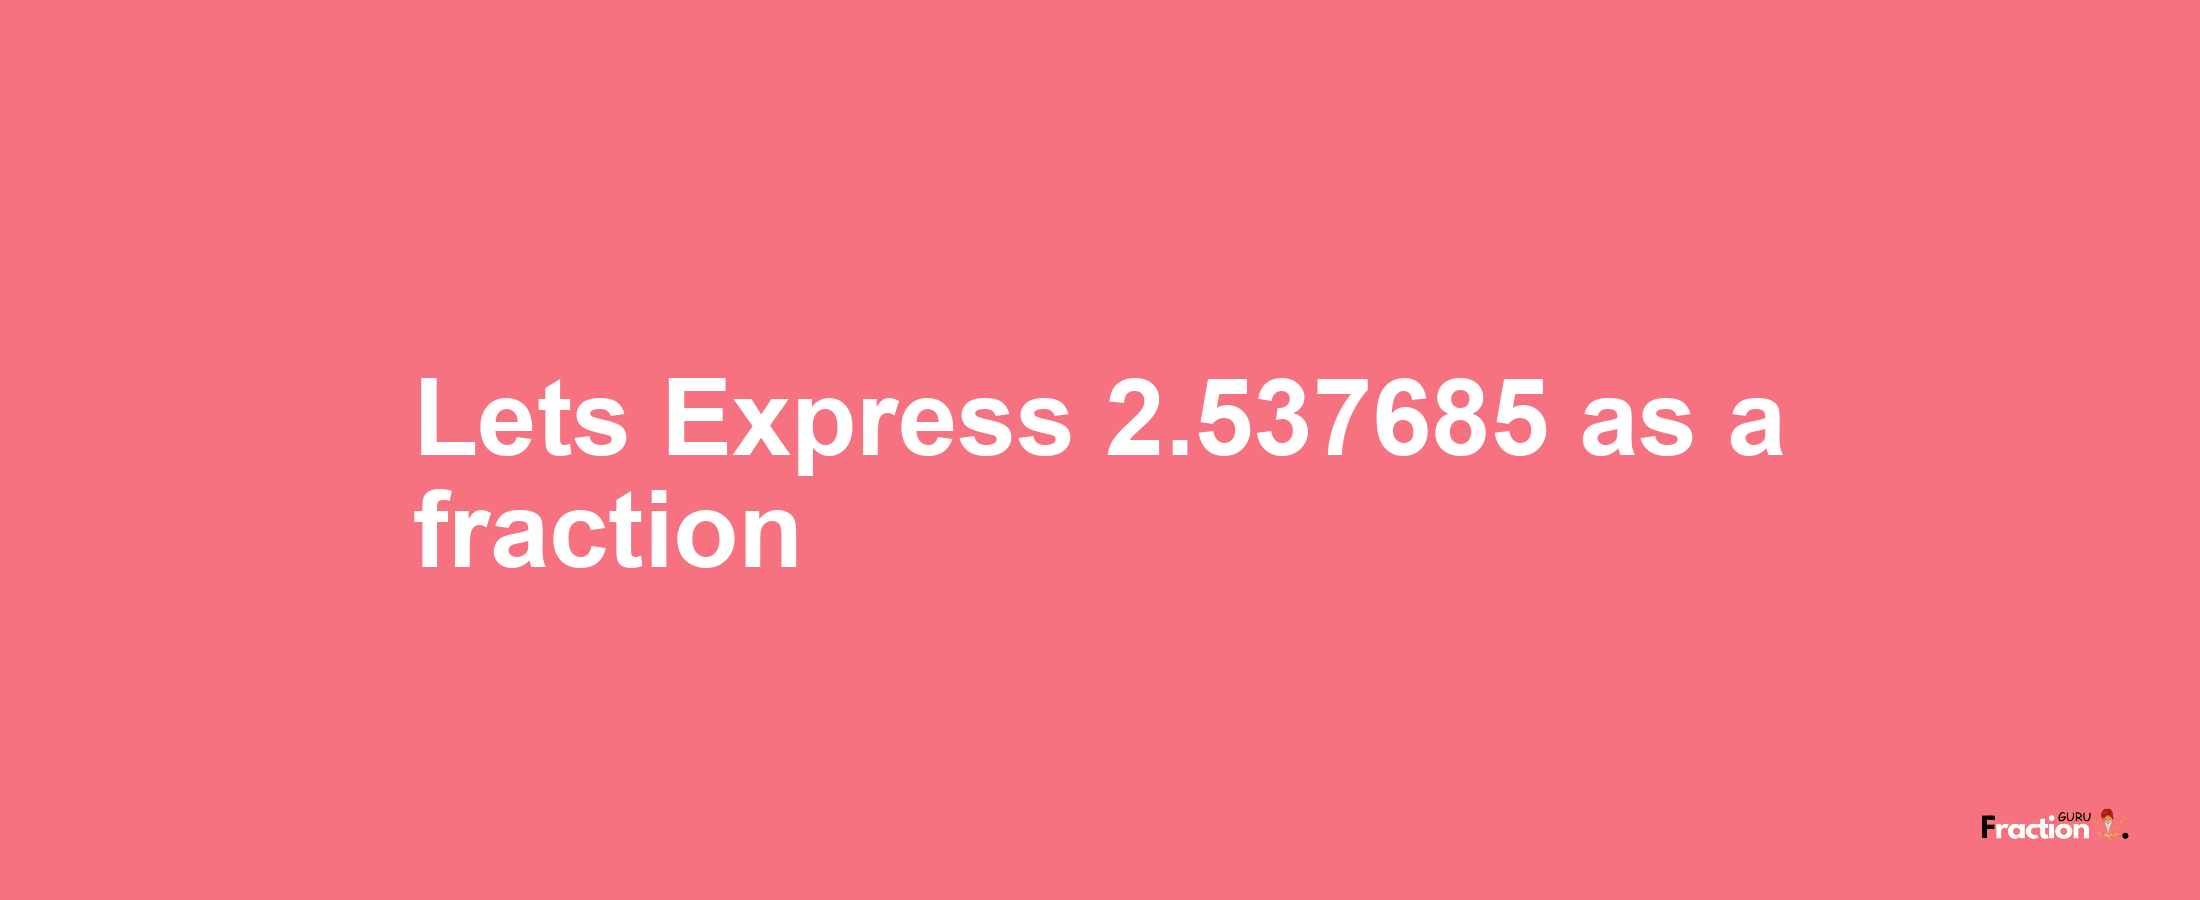 Lets Express 2.537685 as afraction